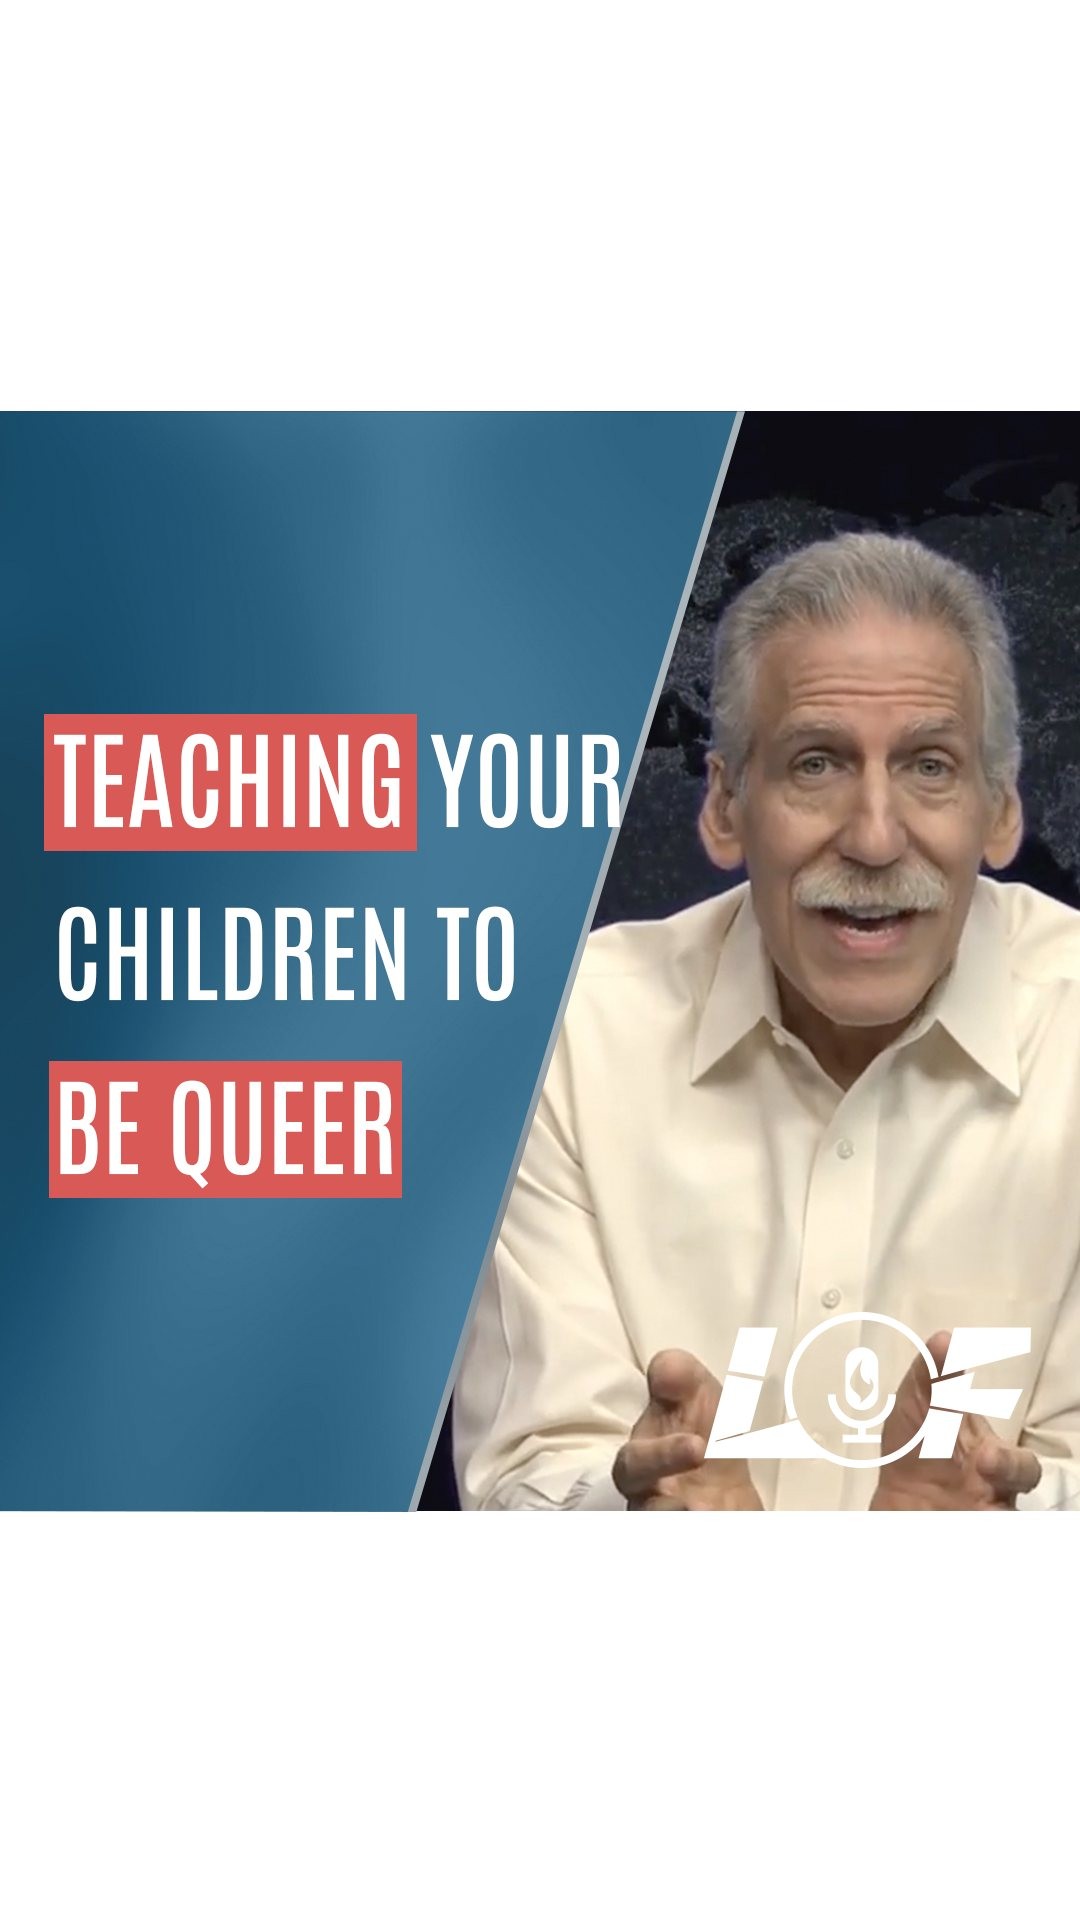 Teaching Your Children to Be Queer
Many LGBTQ activists believe it's important to indoctrinate little children with their values and viewpoints, even if it contradicts their upbringing. Where can we see it, and how do we deal with it? LINK TO FULL VIDEO IN BIO
#askdrbrown #drmichaelbrown #newvideo #watchnow #YouTube #channel #watching #political #bible #lbgtq #pridemonth #lgbtq🌈